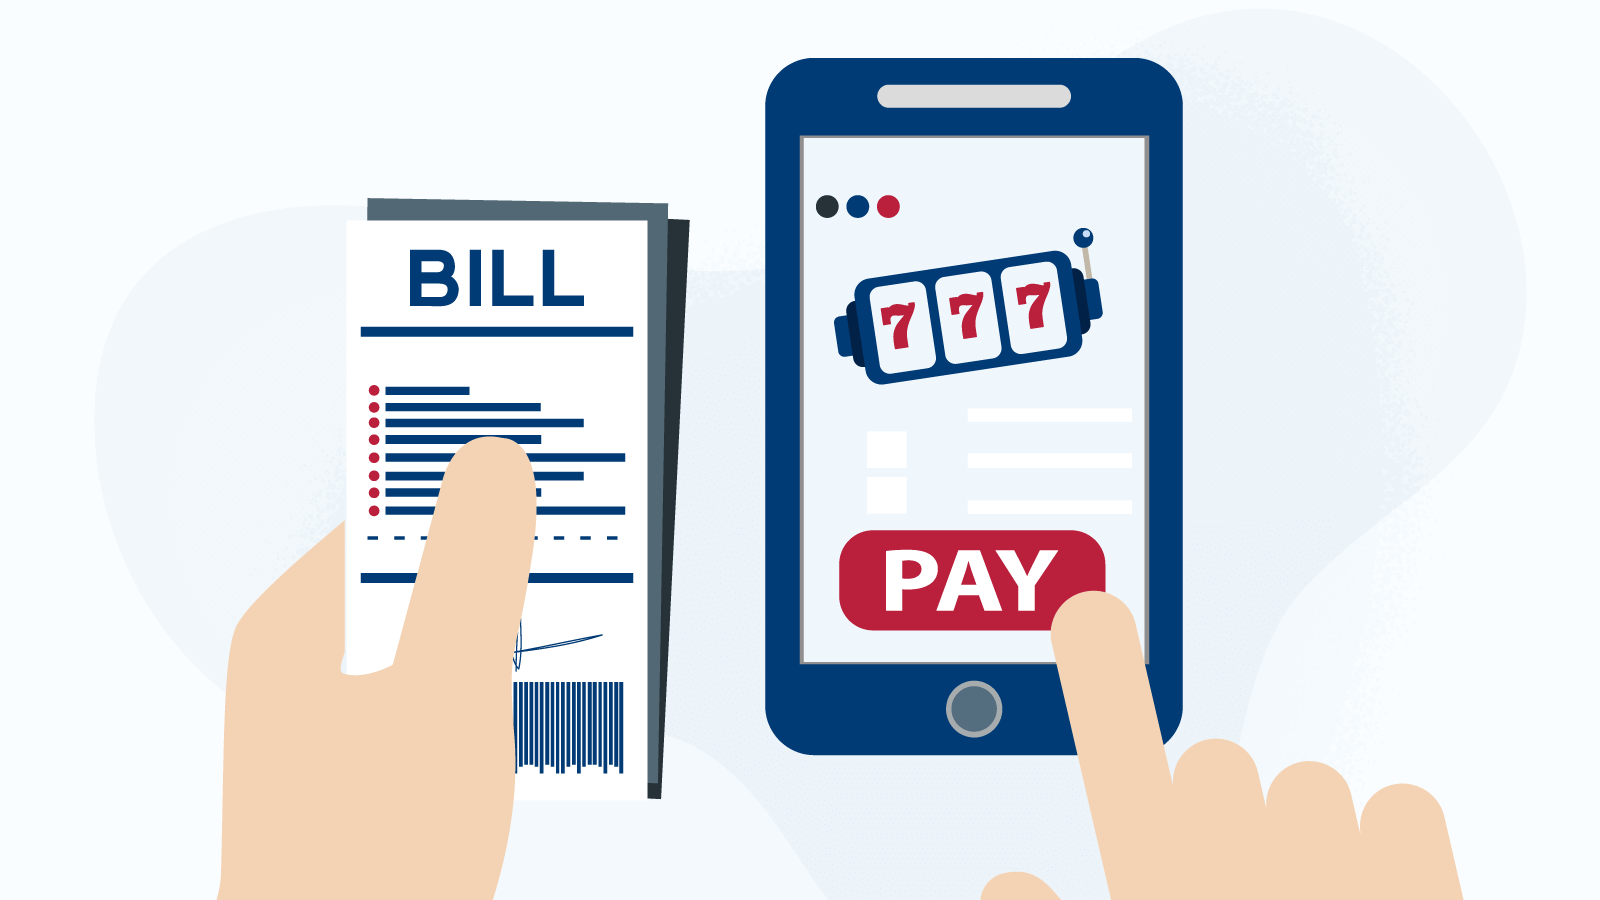 How to deposit by phone bill